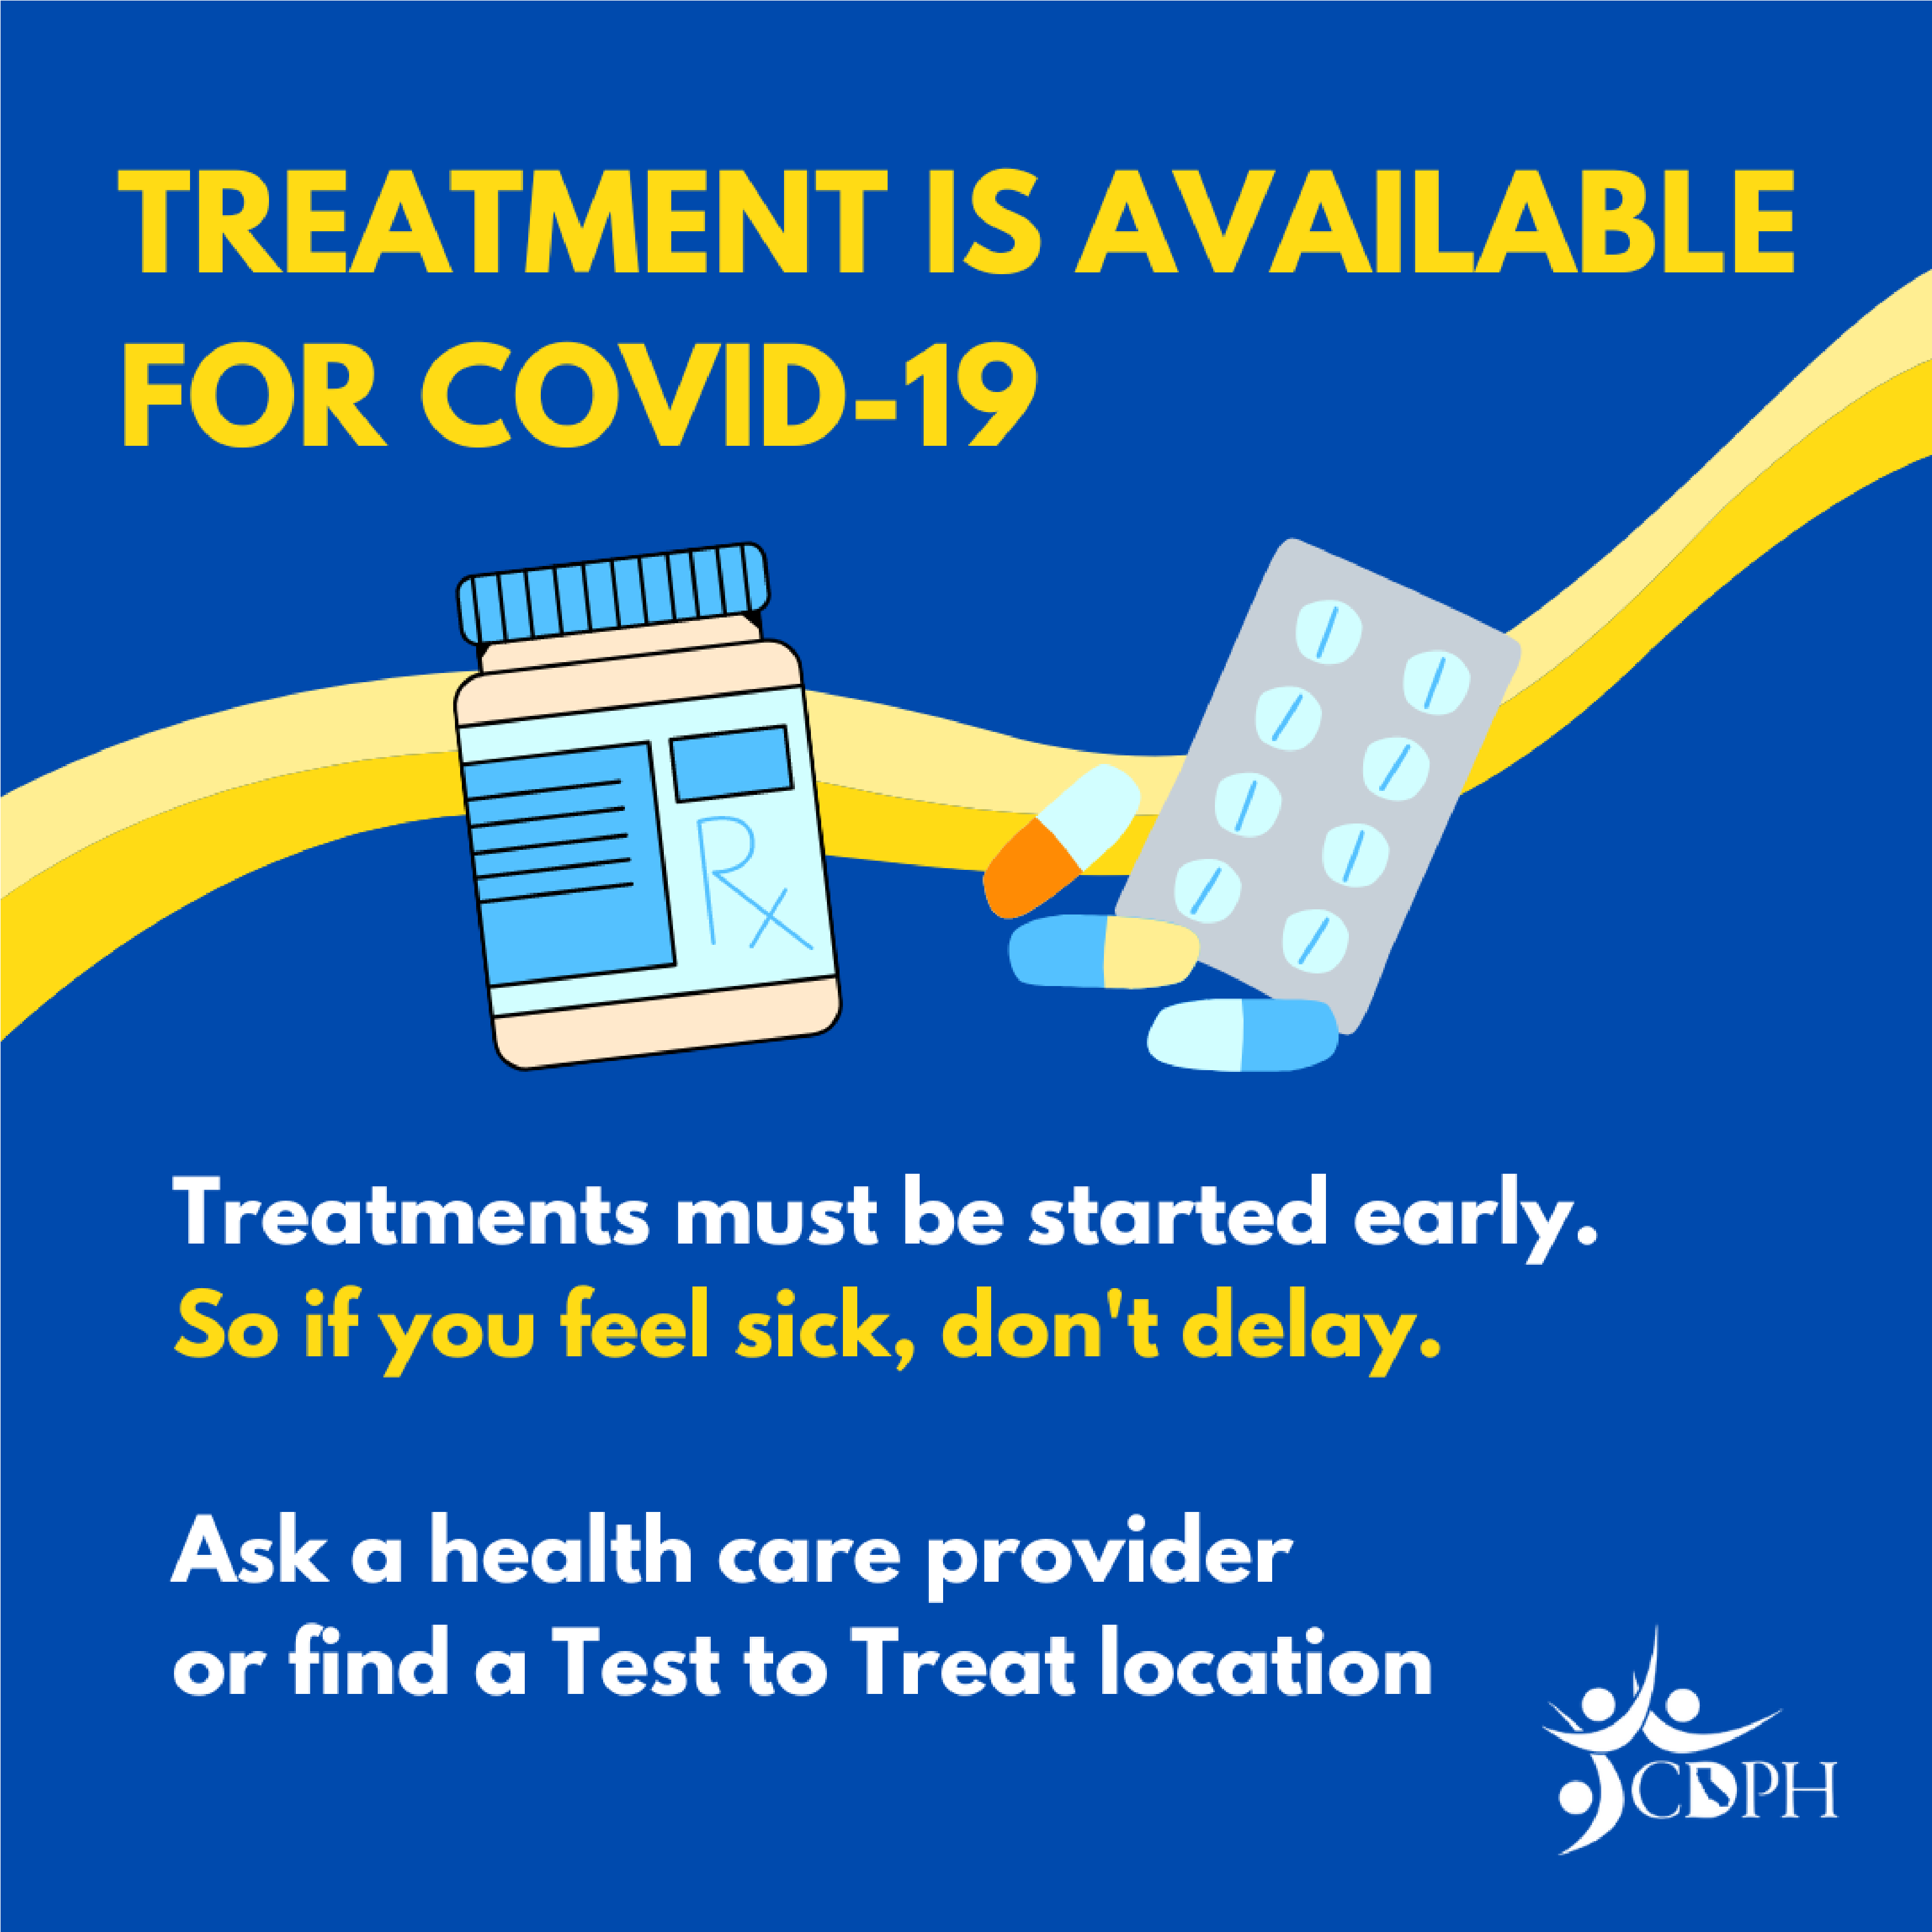 Treatment is available for COVID-19